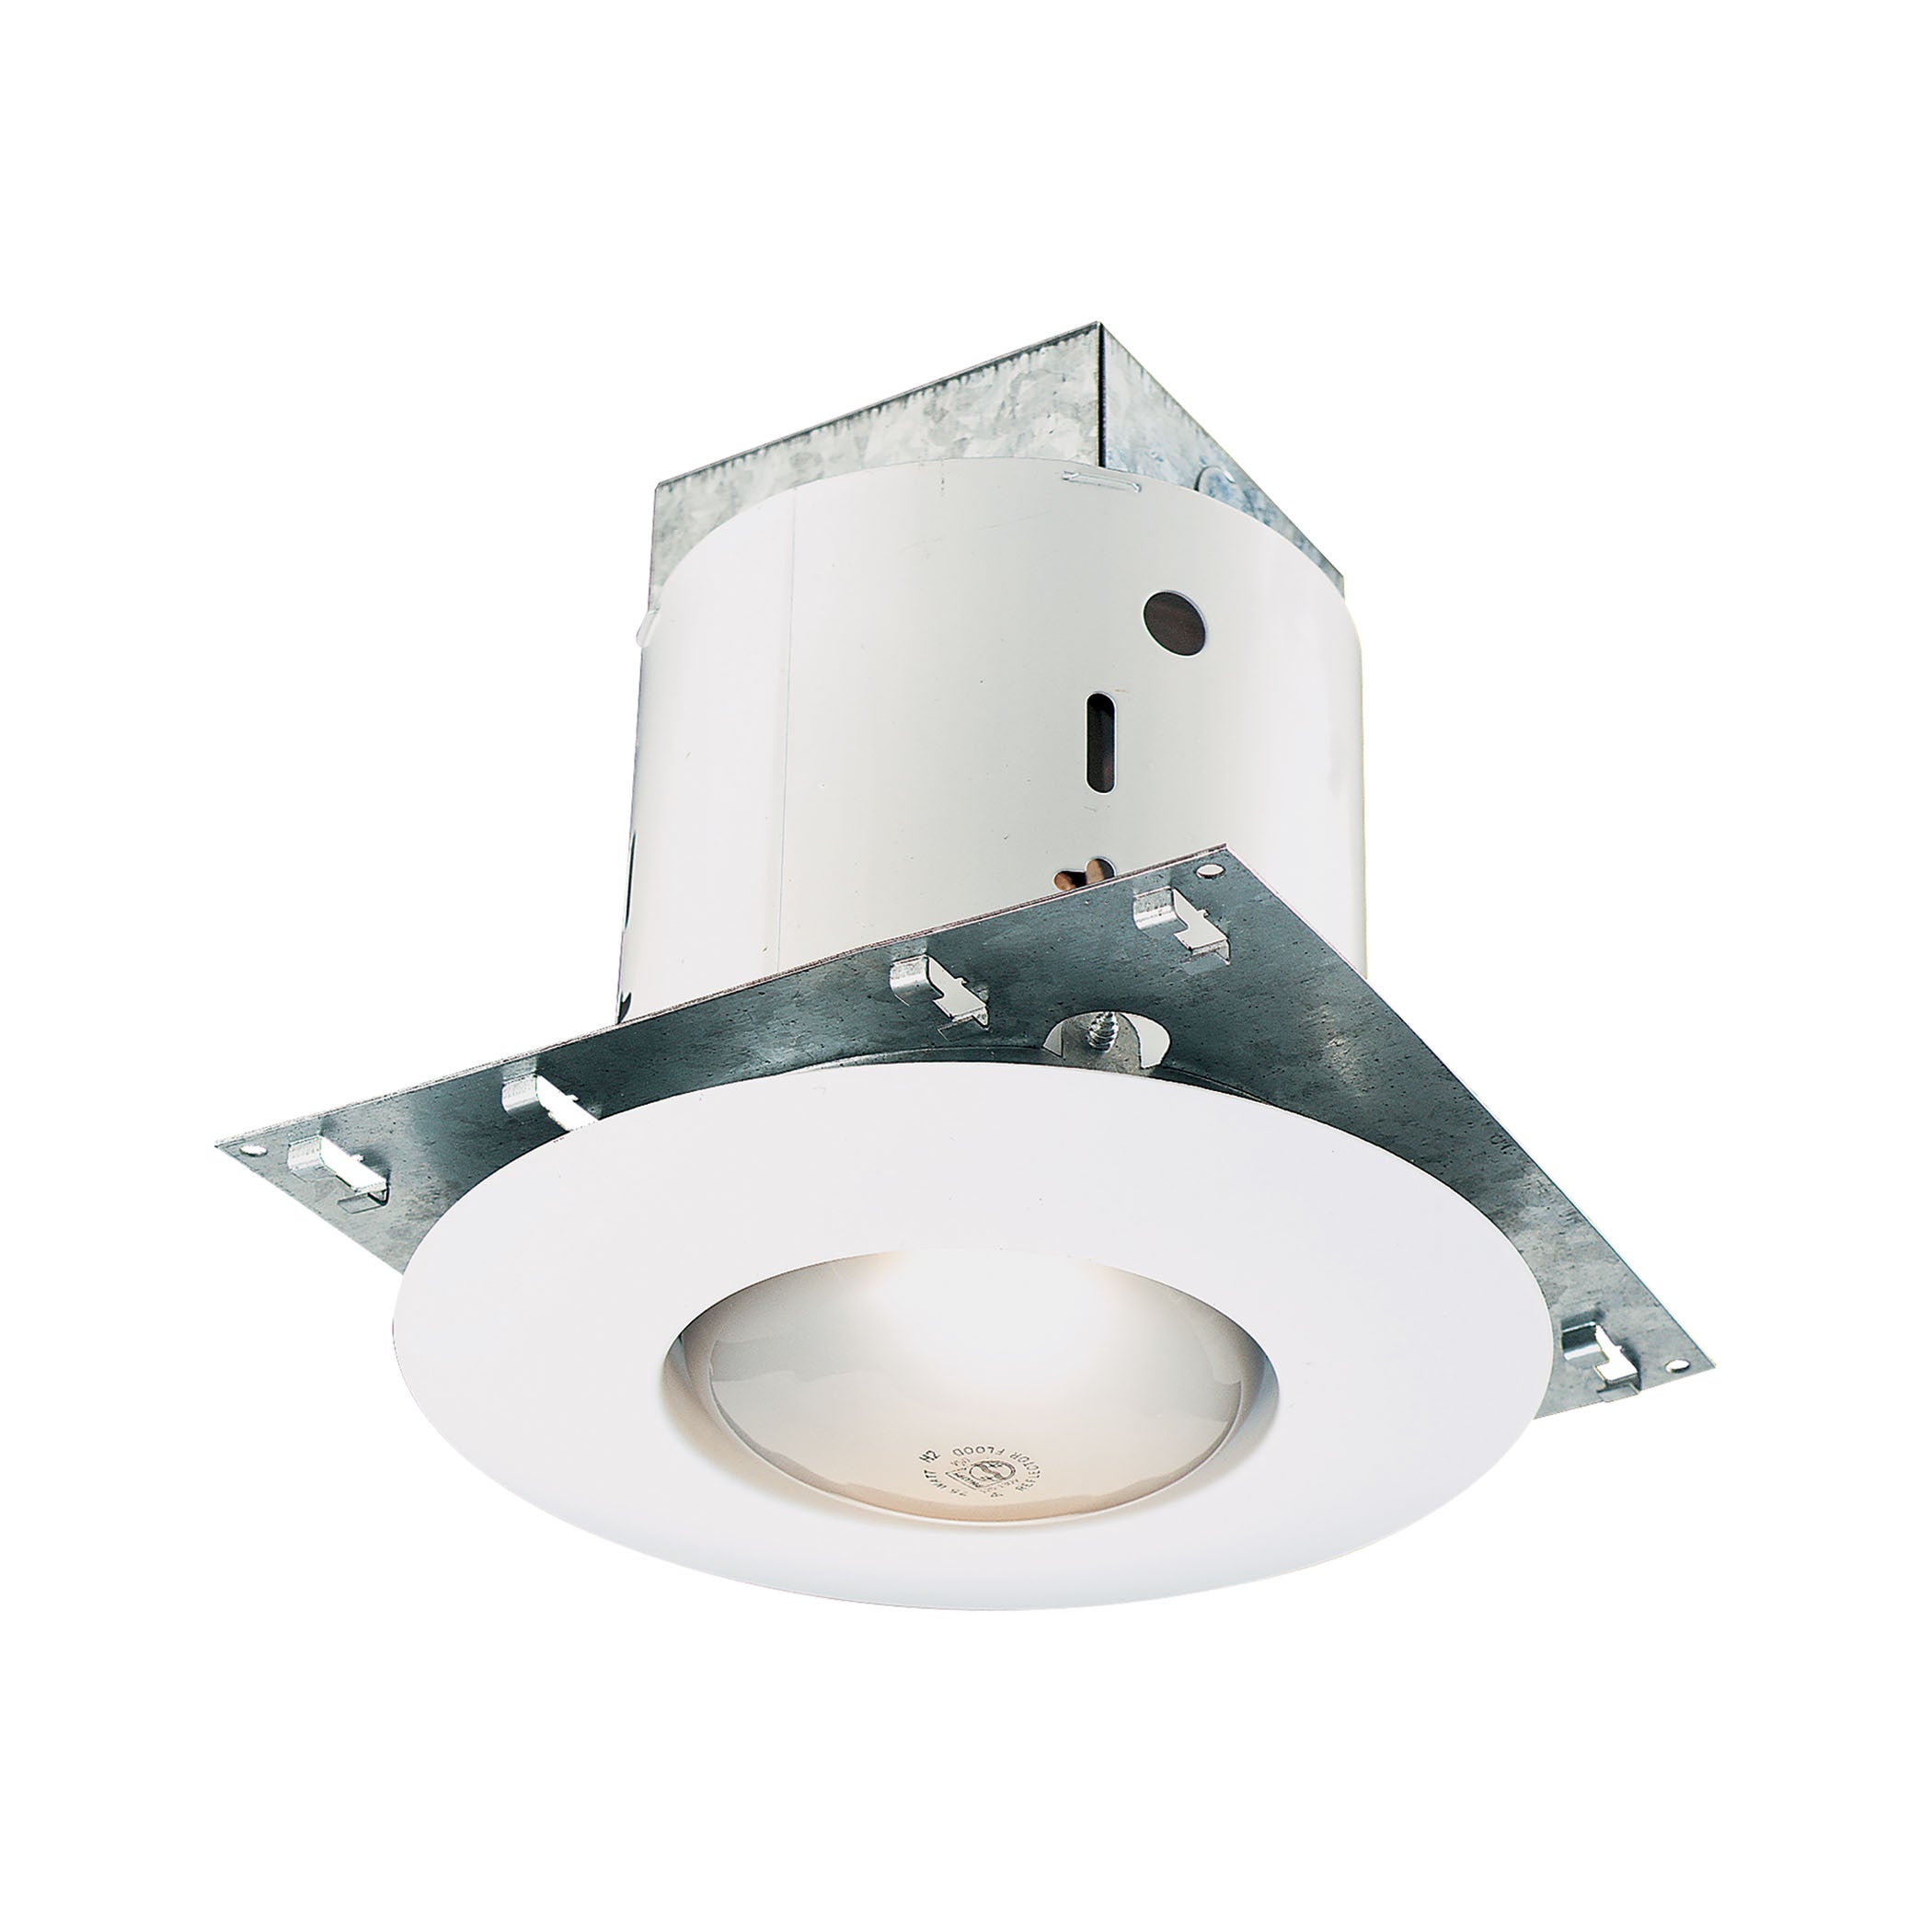 Thomas Lighting Dy6408 Recessed Kit Collection White Finish Transitional Recessed